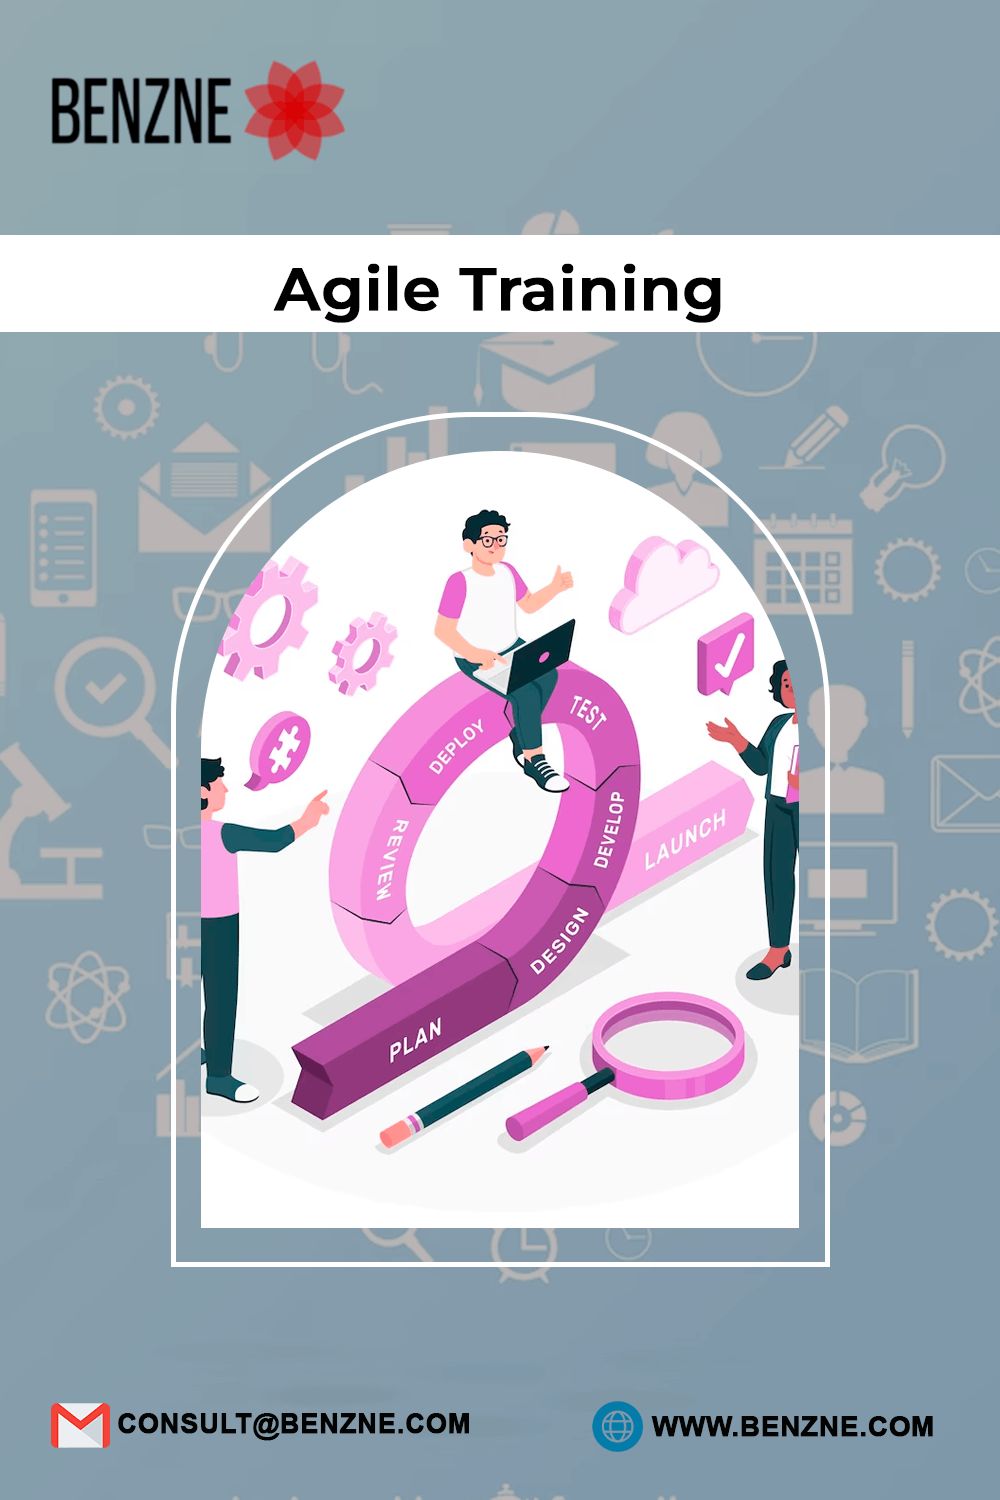 Agile Training With Benzne: A Better Opportunity For Scaling Agile Practices